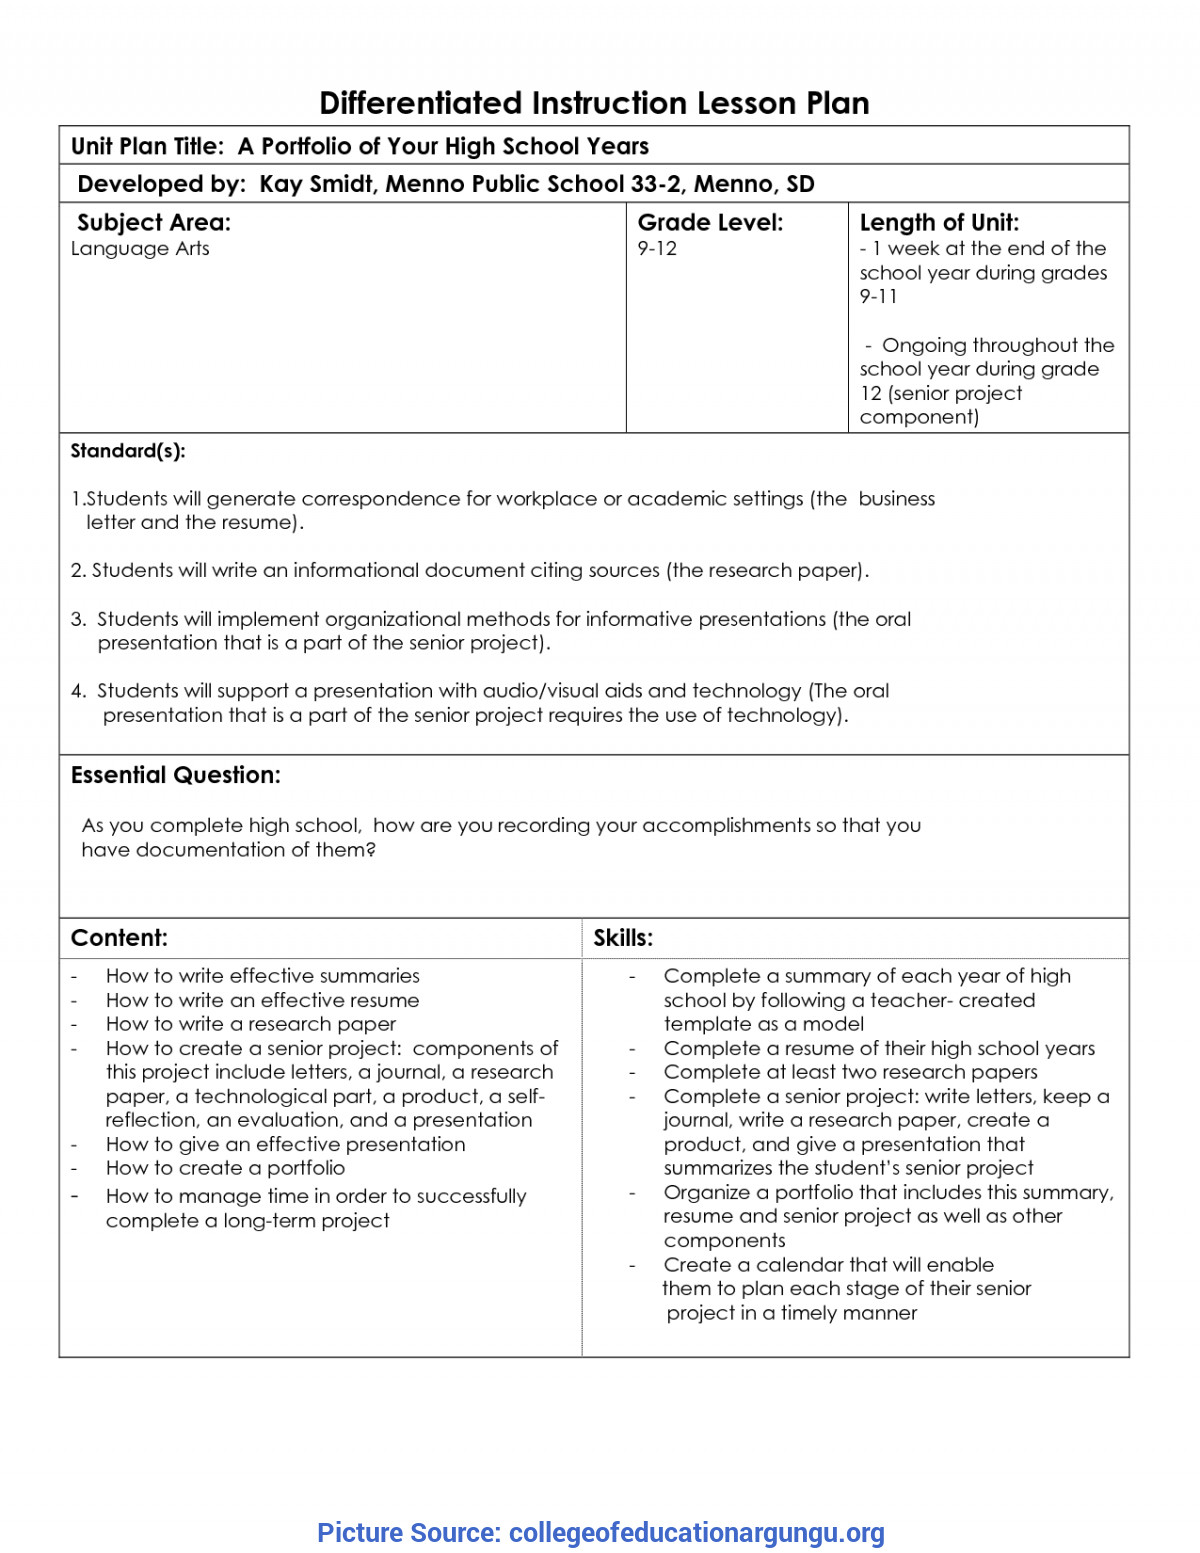 Differentiated Lesson Plan Differentiated Lesson Plan Template